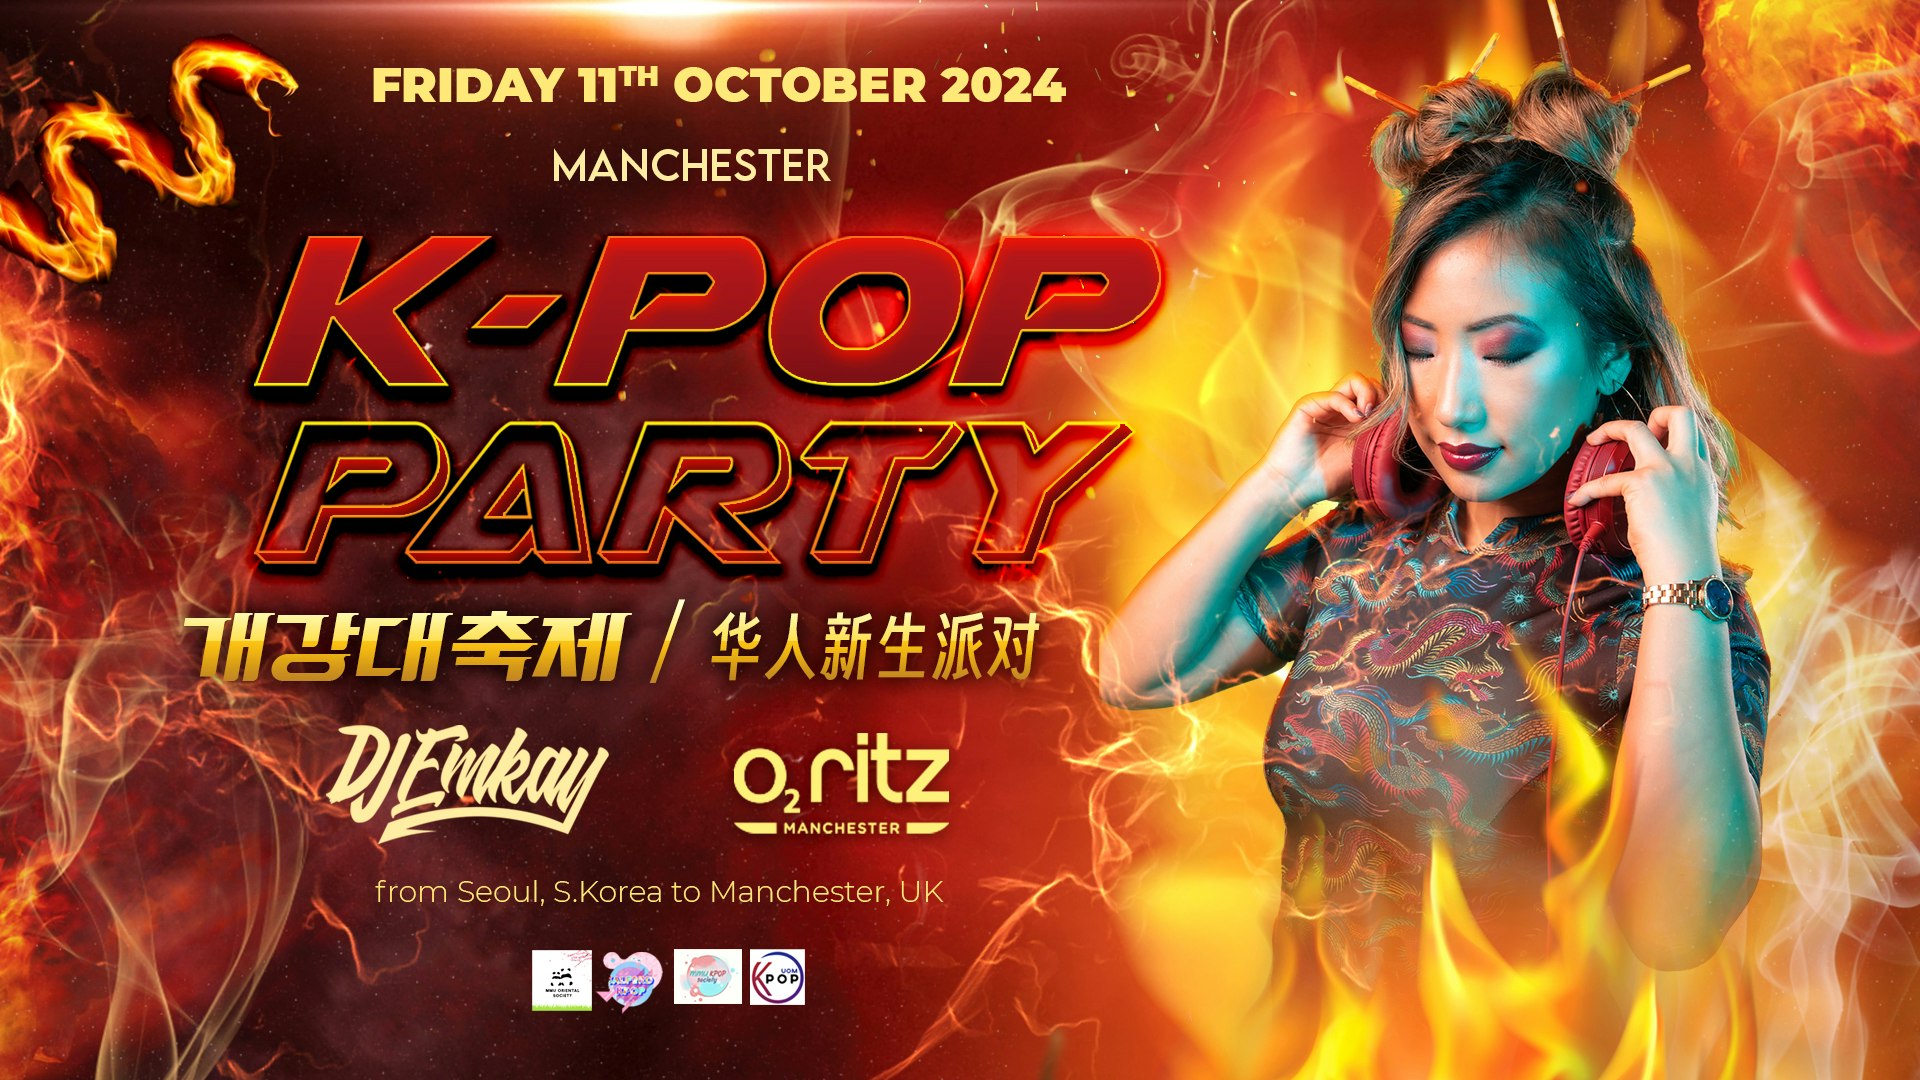 Manchester K-Pop Party – Fire Tour with DJ EMKAY | Friday 11th October